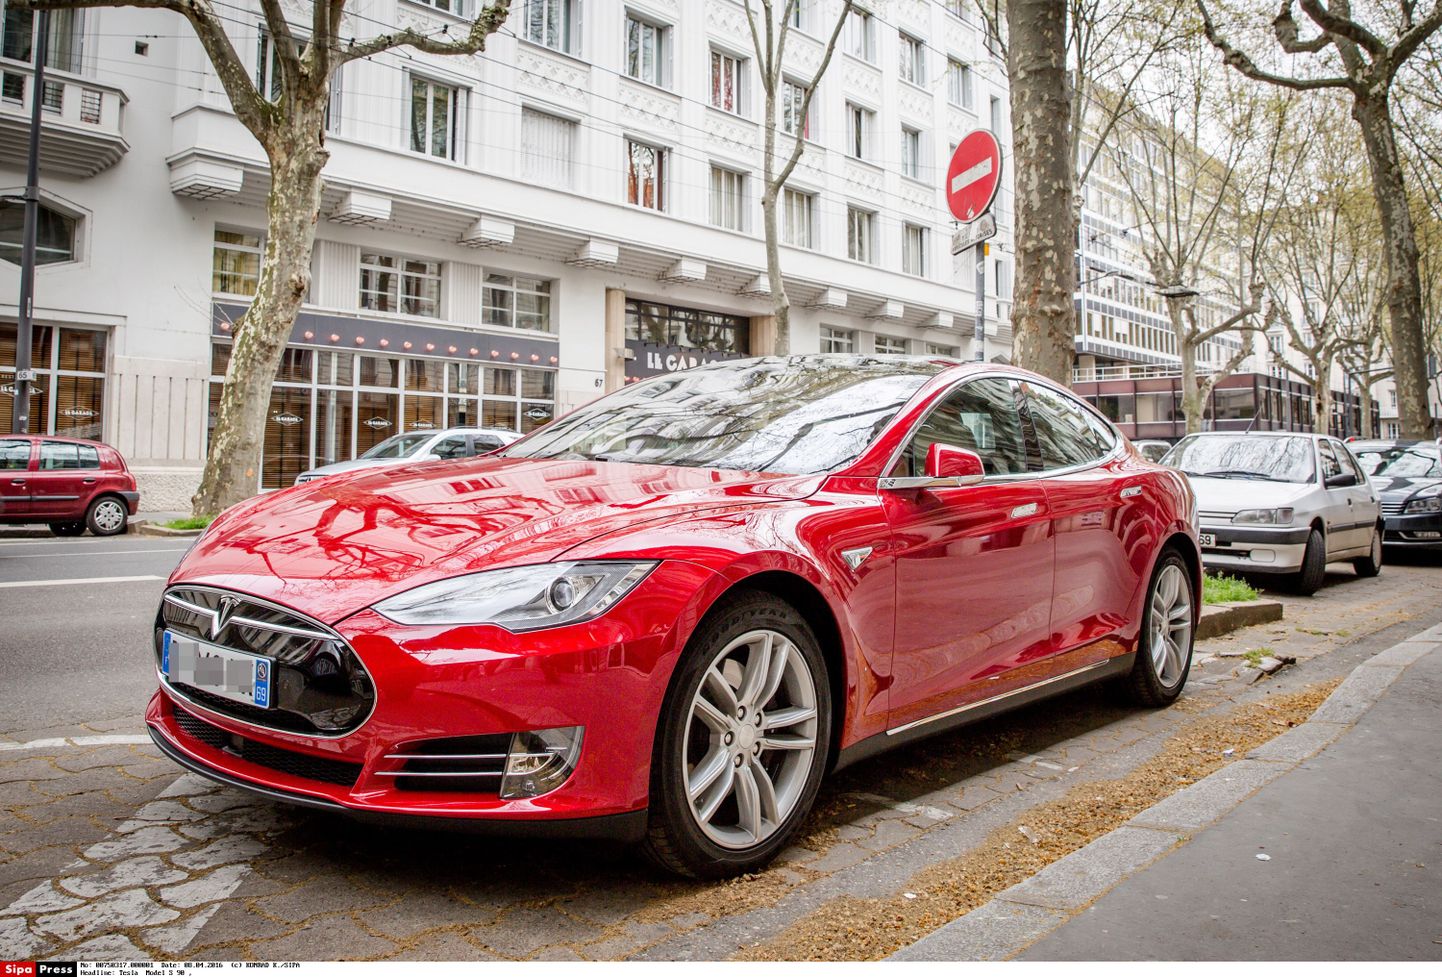 Tesla  Model S 90 , an electric car by American manufacturer Tesla in front of the Tesla dealership in Lyon. Tesla Motors is a sports car manufacturer of electric cars and high-end whose headquarters are in Palo Alto, in Silicon Valley in the United States. Lyon / France / 08/04/2016/KONRADK_KONRADk.001/Credit:KONRAD K./SIPA/1604081730